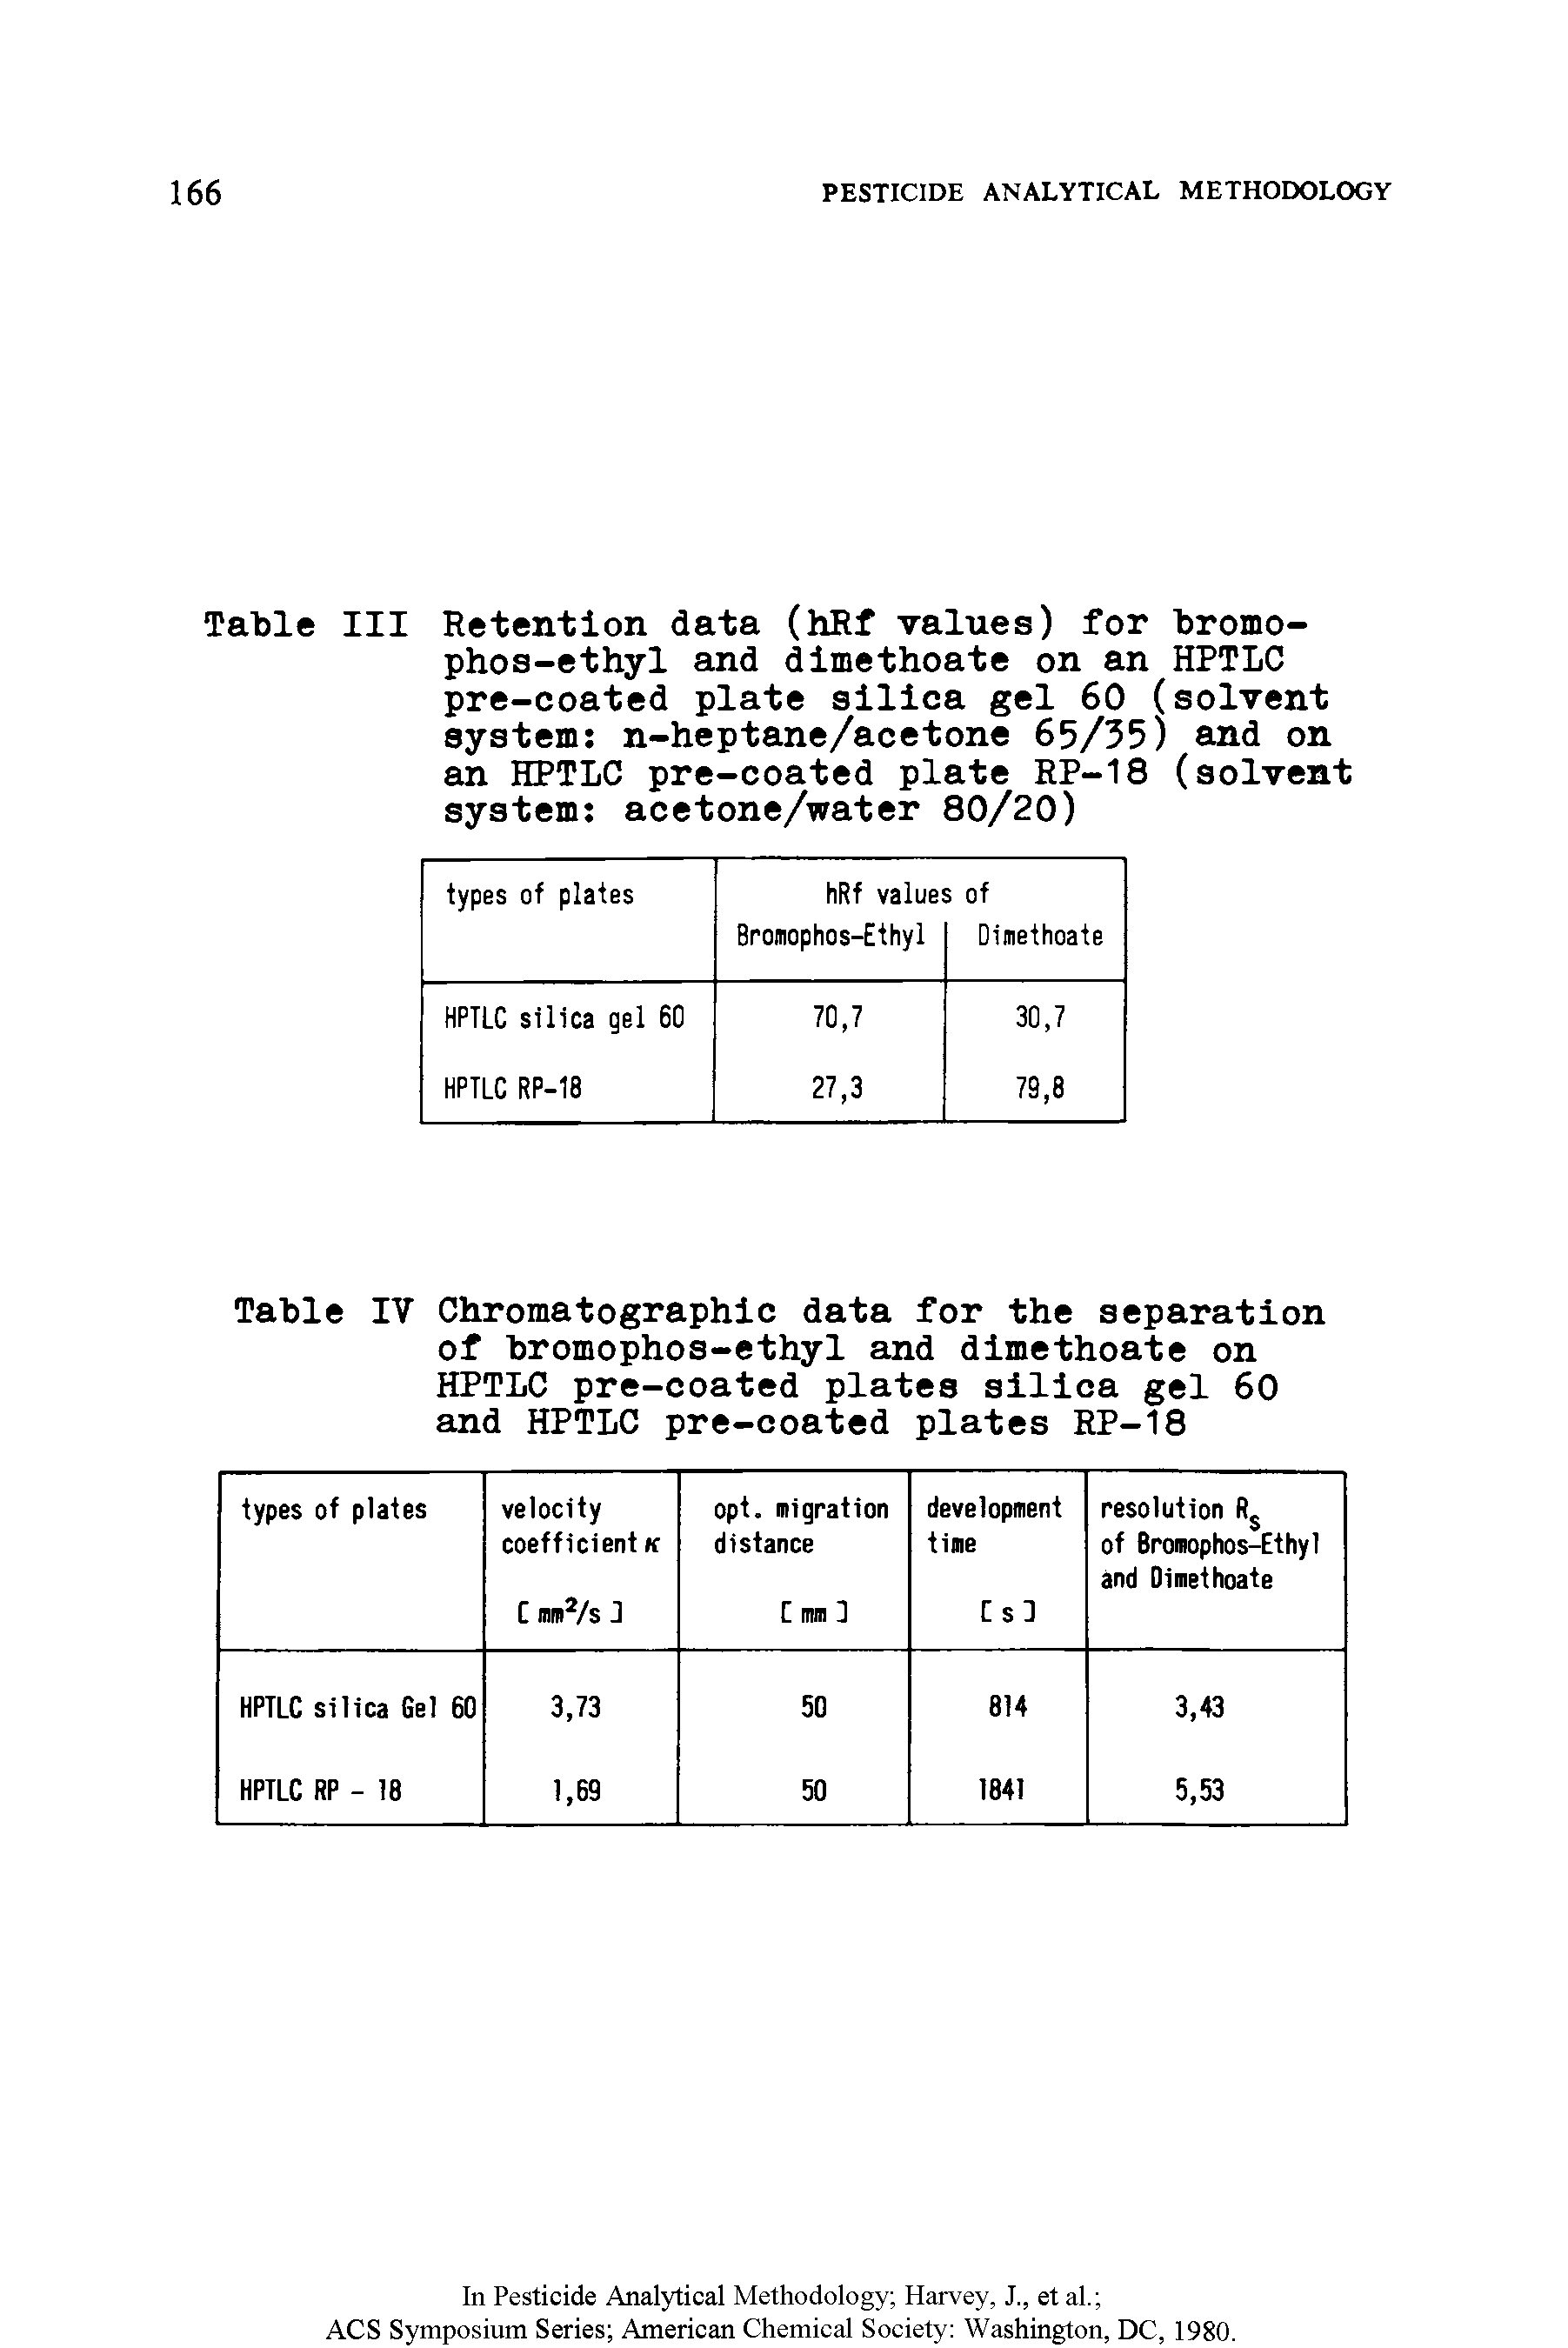 Table III Retention data (hRf values) for bromophos-ethyl and dimethoate on an HPTLC pre-coated plate silica gel 60 (solvent system n-heptane/acetone 65/35) and on an HPTLC pre-coated plate RP-18 (solvent system acetone/water 80/20)...